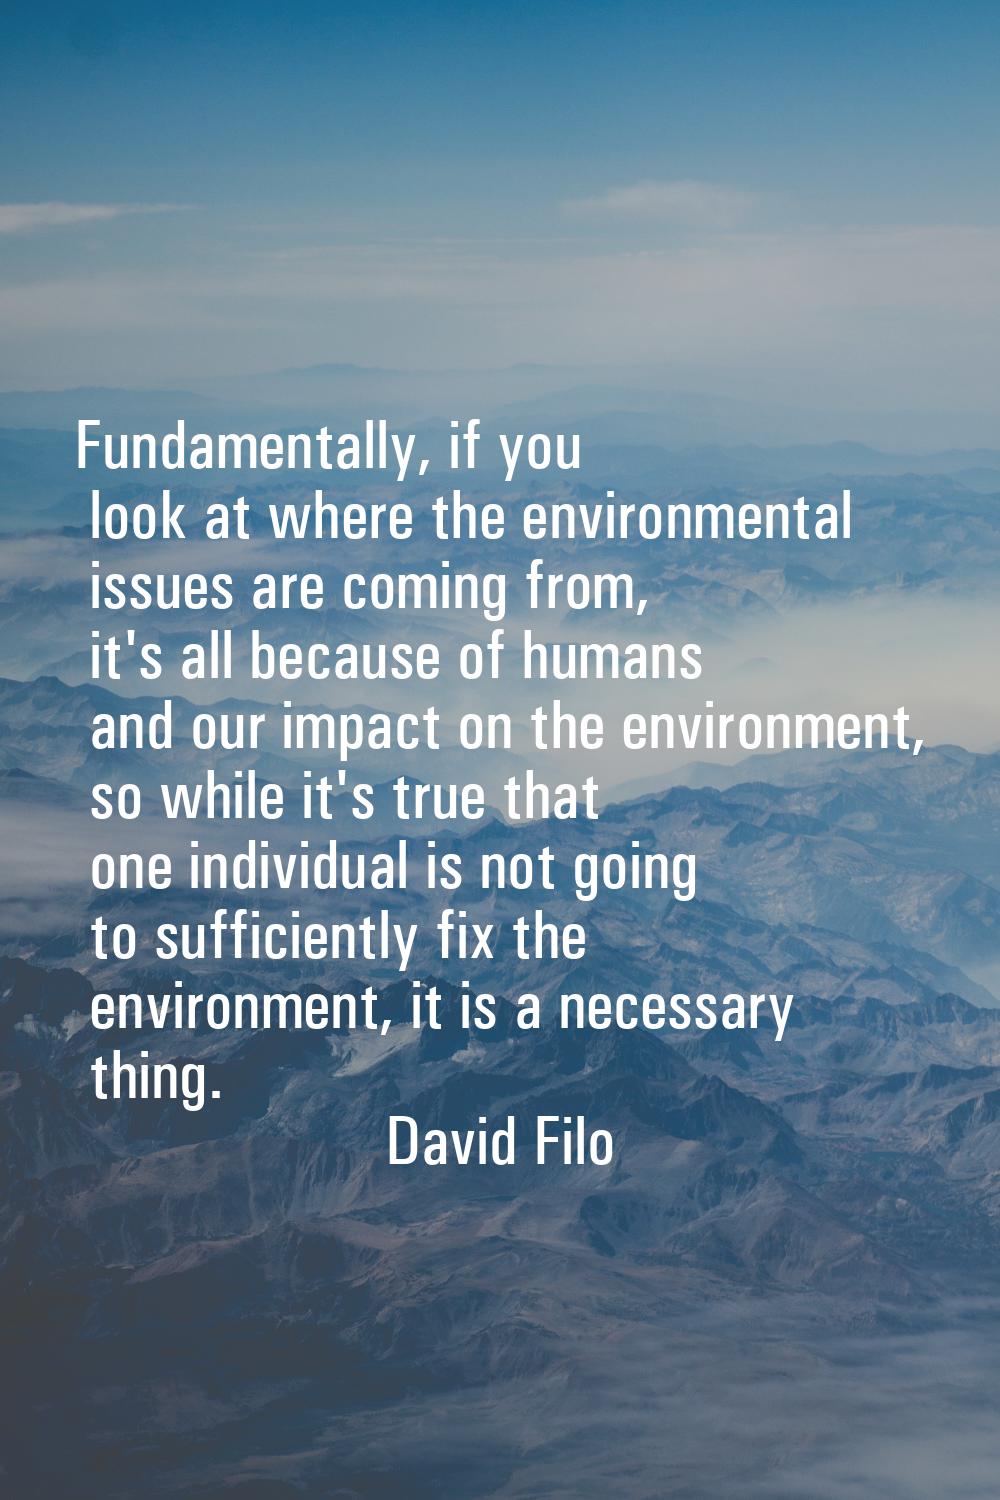 Fundamentally, if you look at where the environmental issues are coming from, it's all because of h